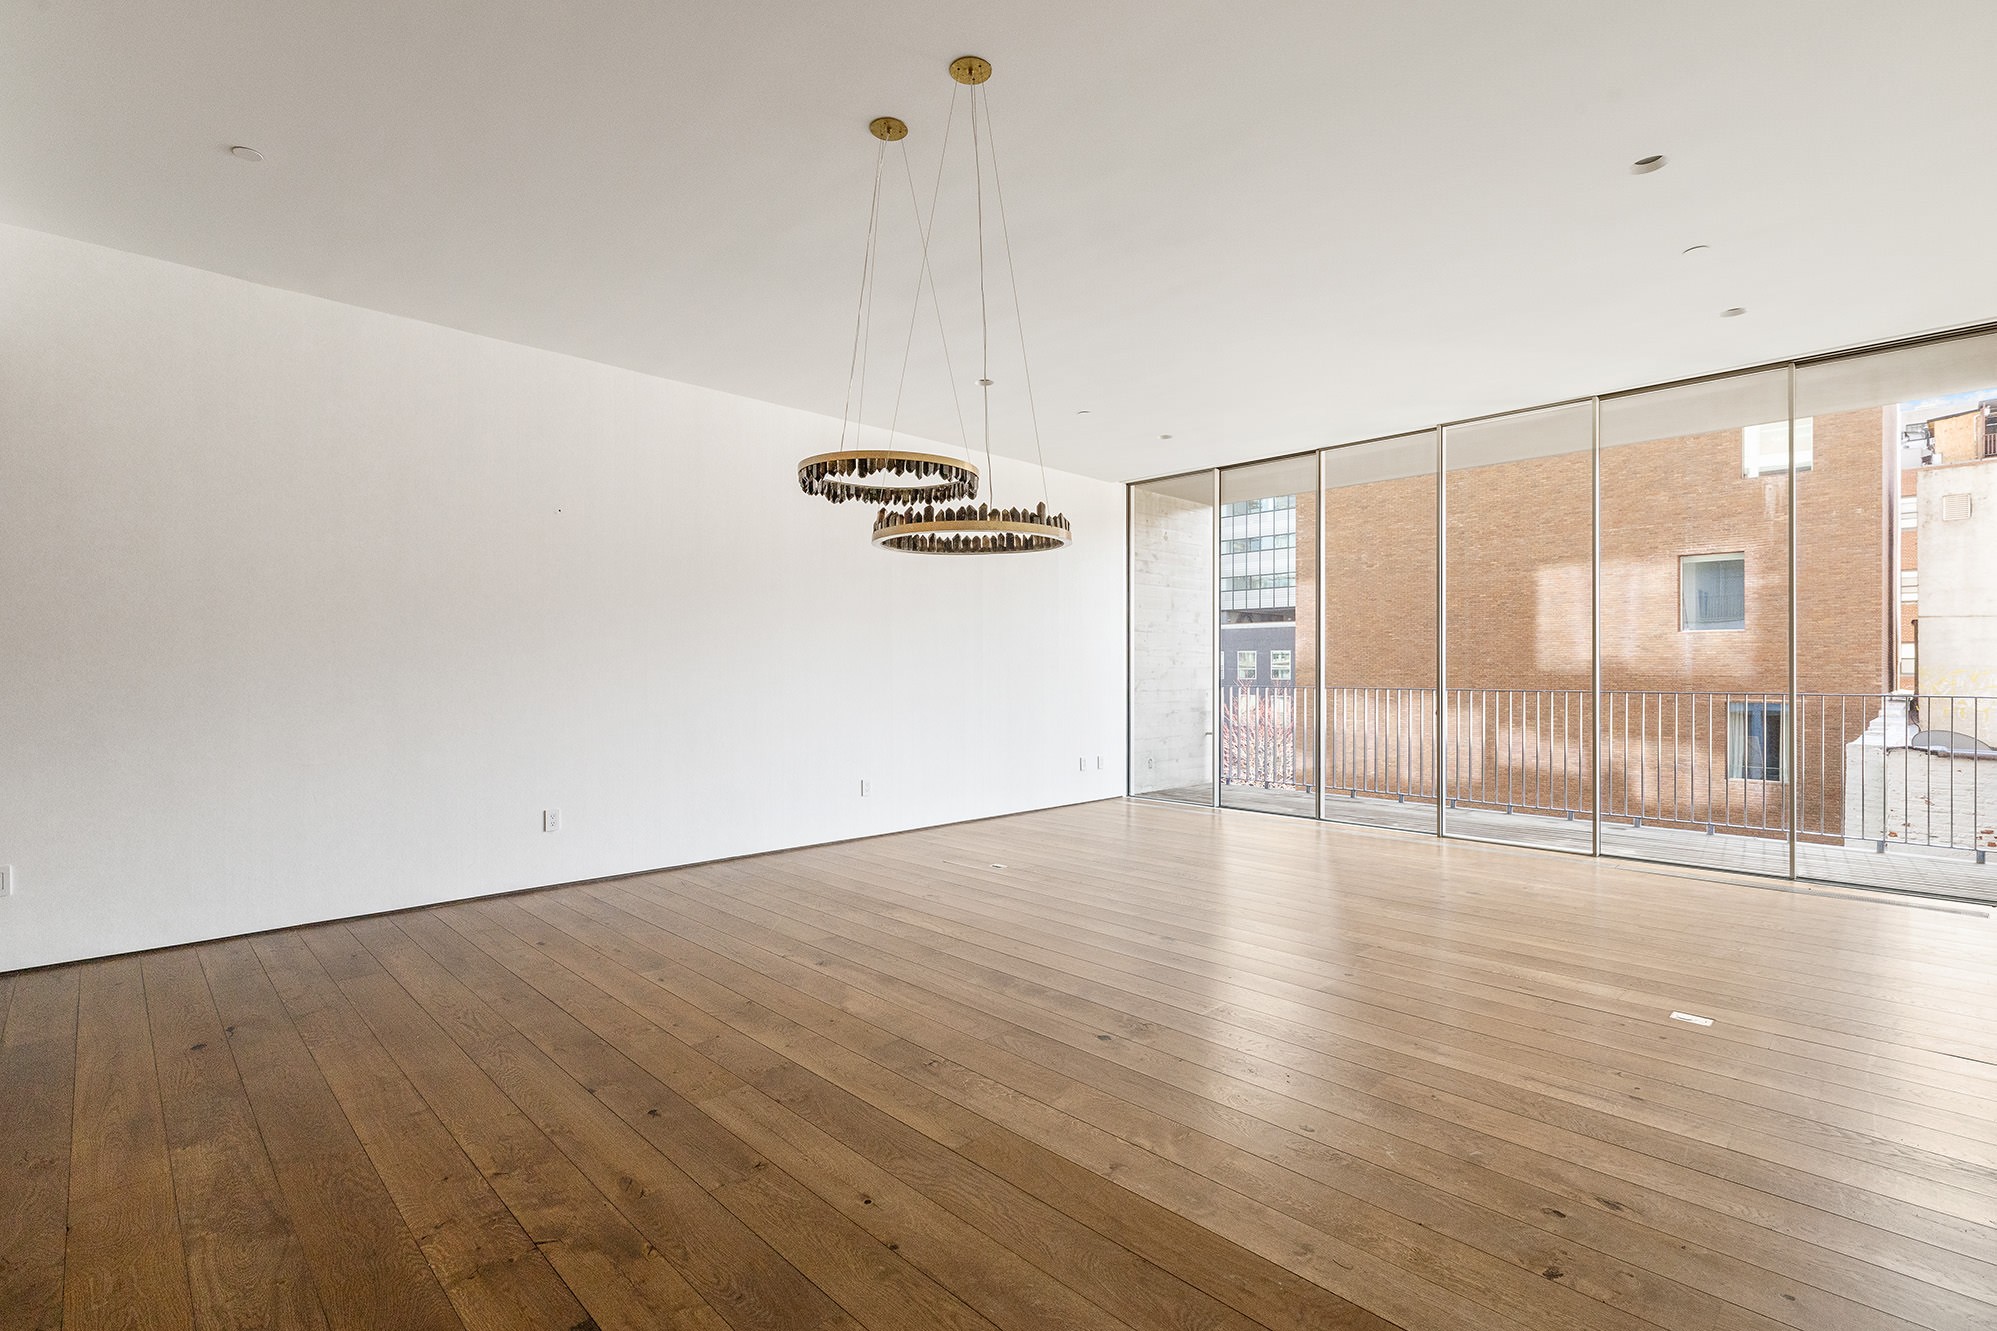 a view of an empty room with wooden floor and windows